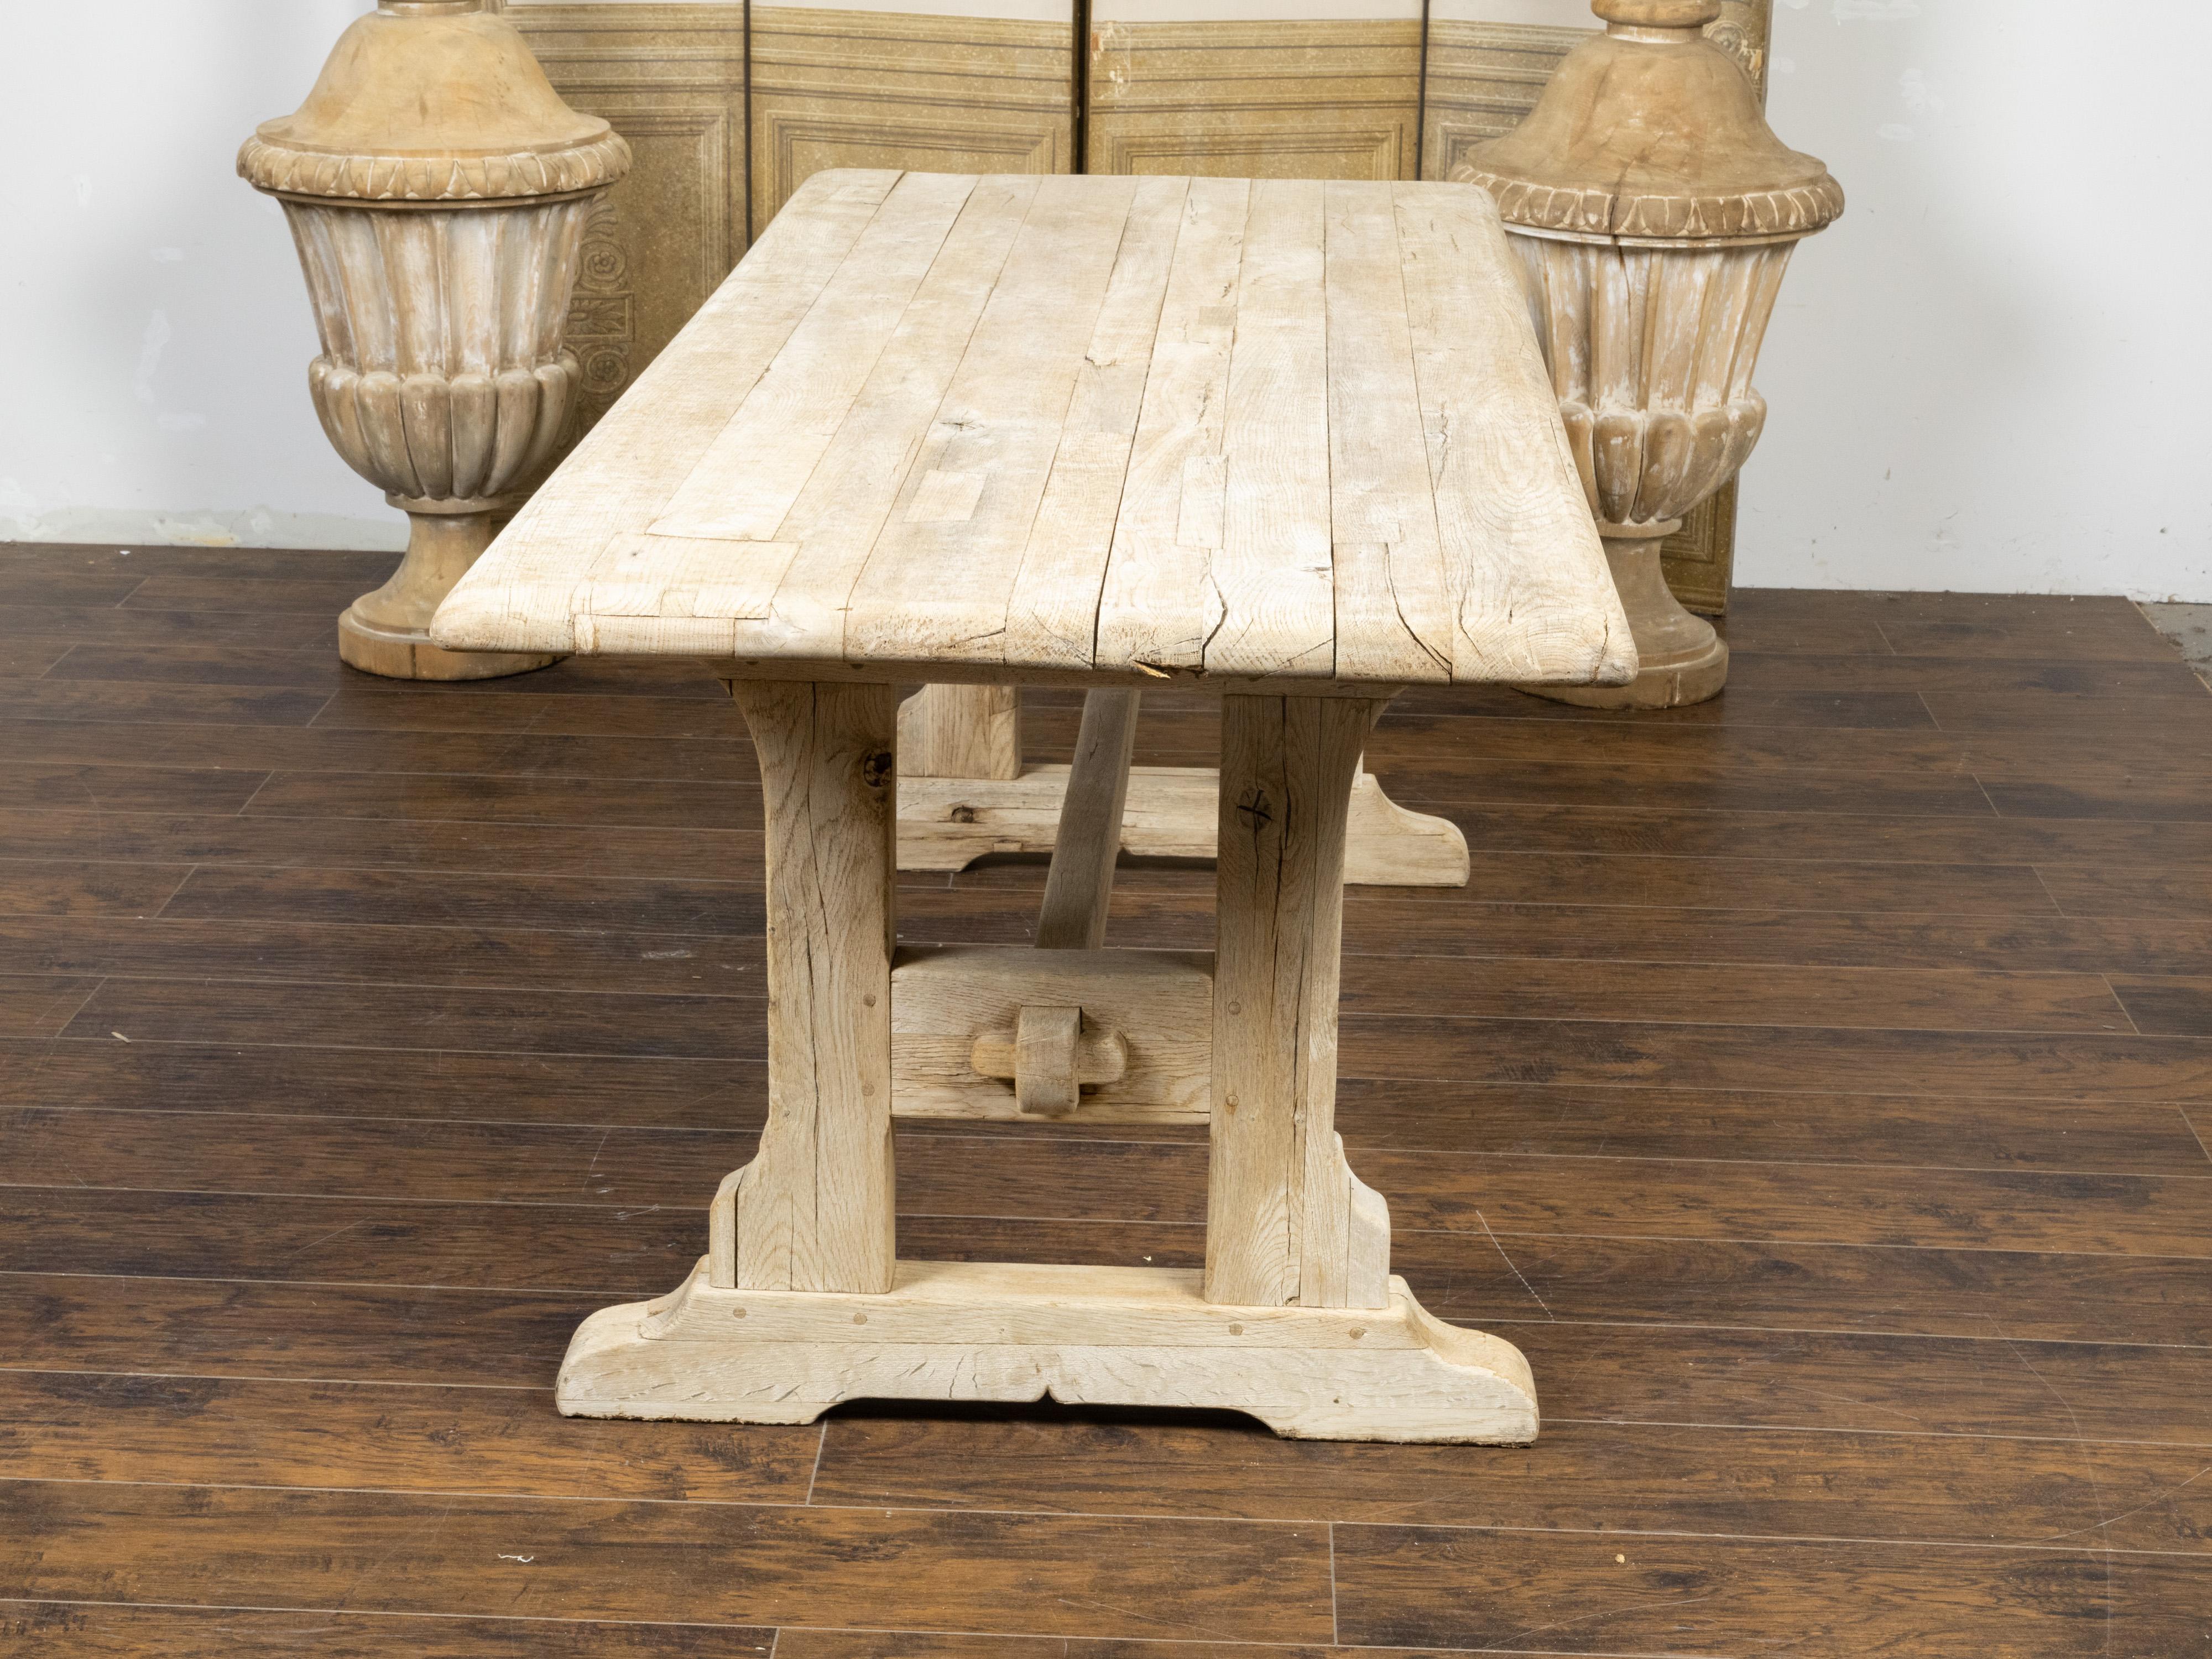 Rustic English 19th Century Natural Wood Farm Table with Trestle Base For Sale 6